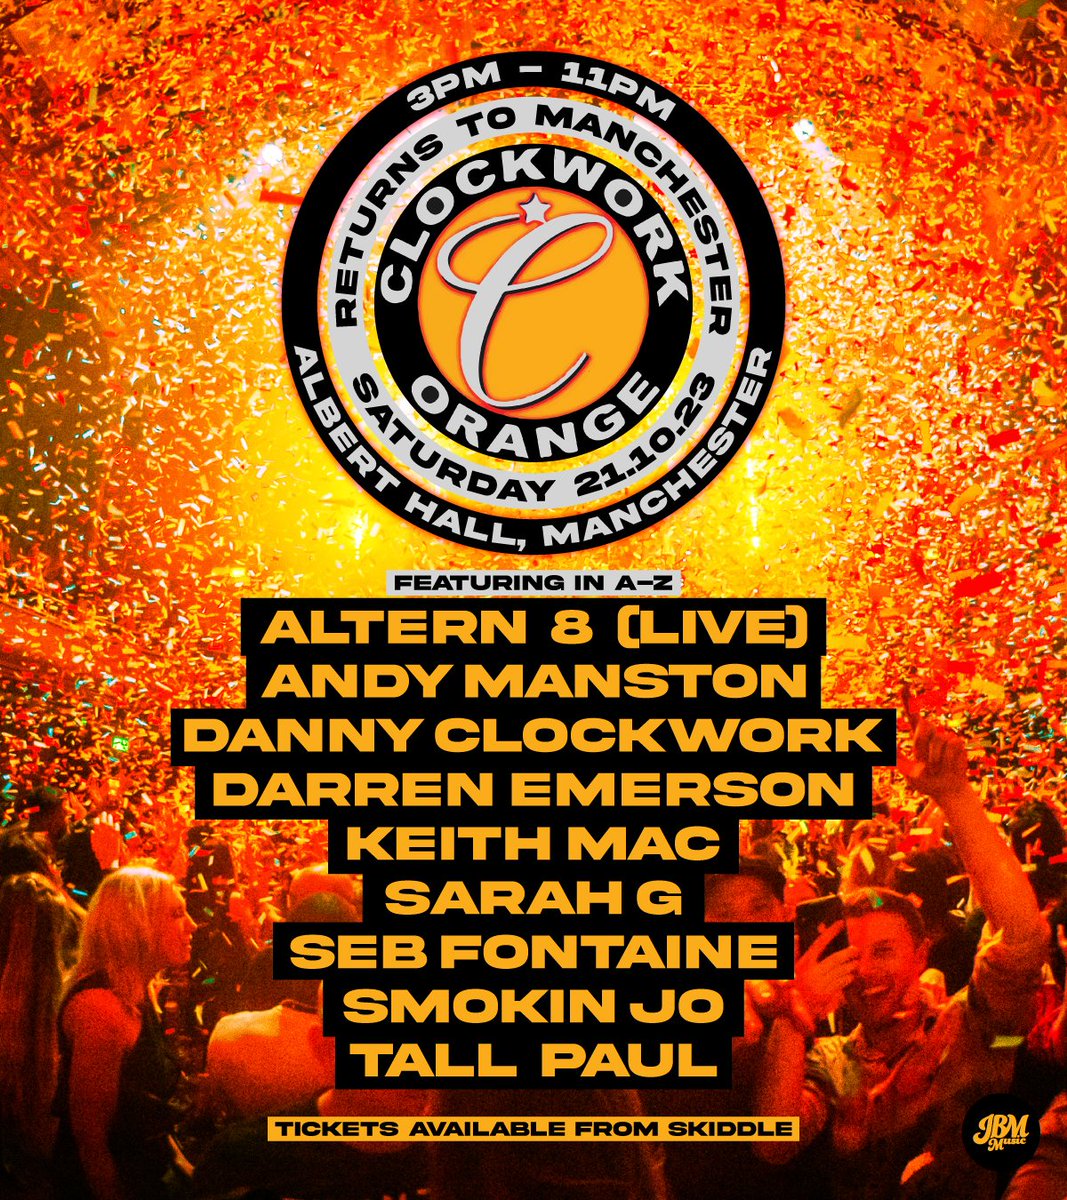 NOT LONG TO GO: On the 21st of October, the legendary club night + festival, @Clockwork_OClub are taking over our venue for an outrageous 8-hour party! Featuring Altern8, @sebfontaine, @DJTallPaul + many more, from 3pm until 11pm Tickets: tinyurl.com/fu25pumd